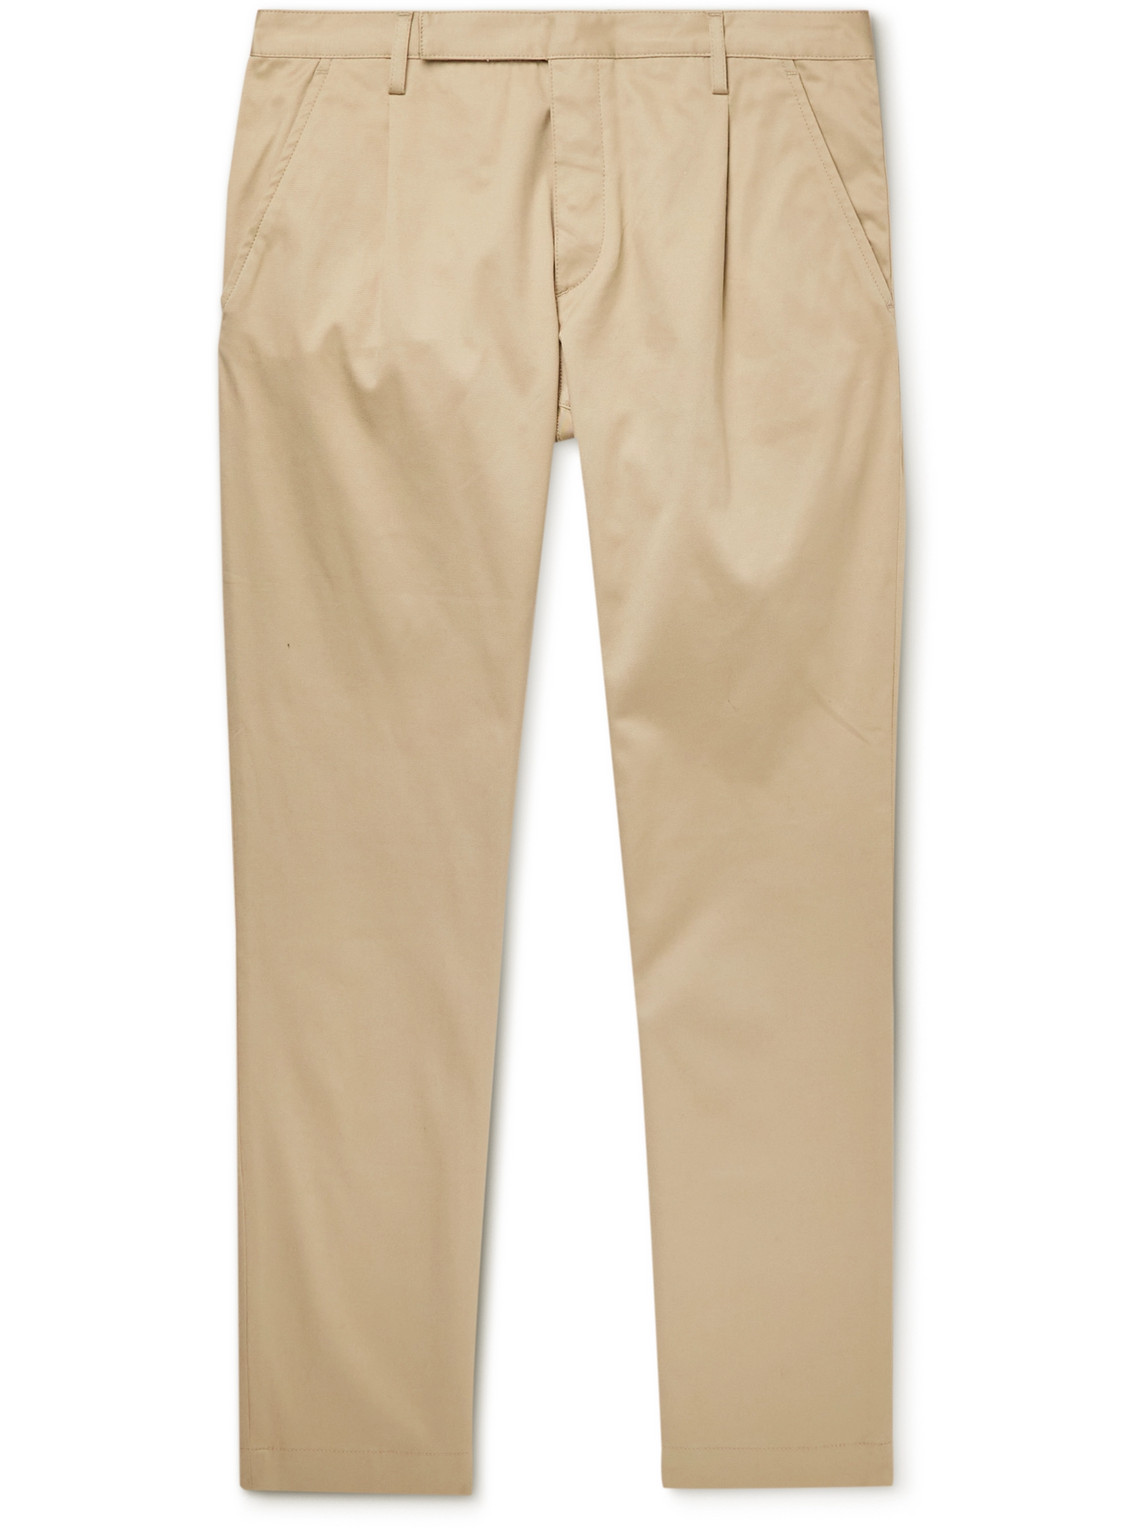 SAINT LAURENT TAPERED PLEATED COTTON-BLEND TWILL CHINOS